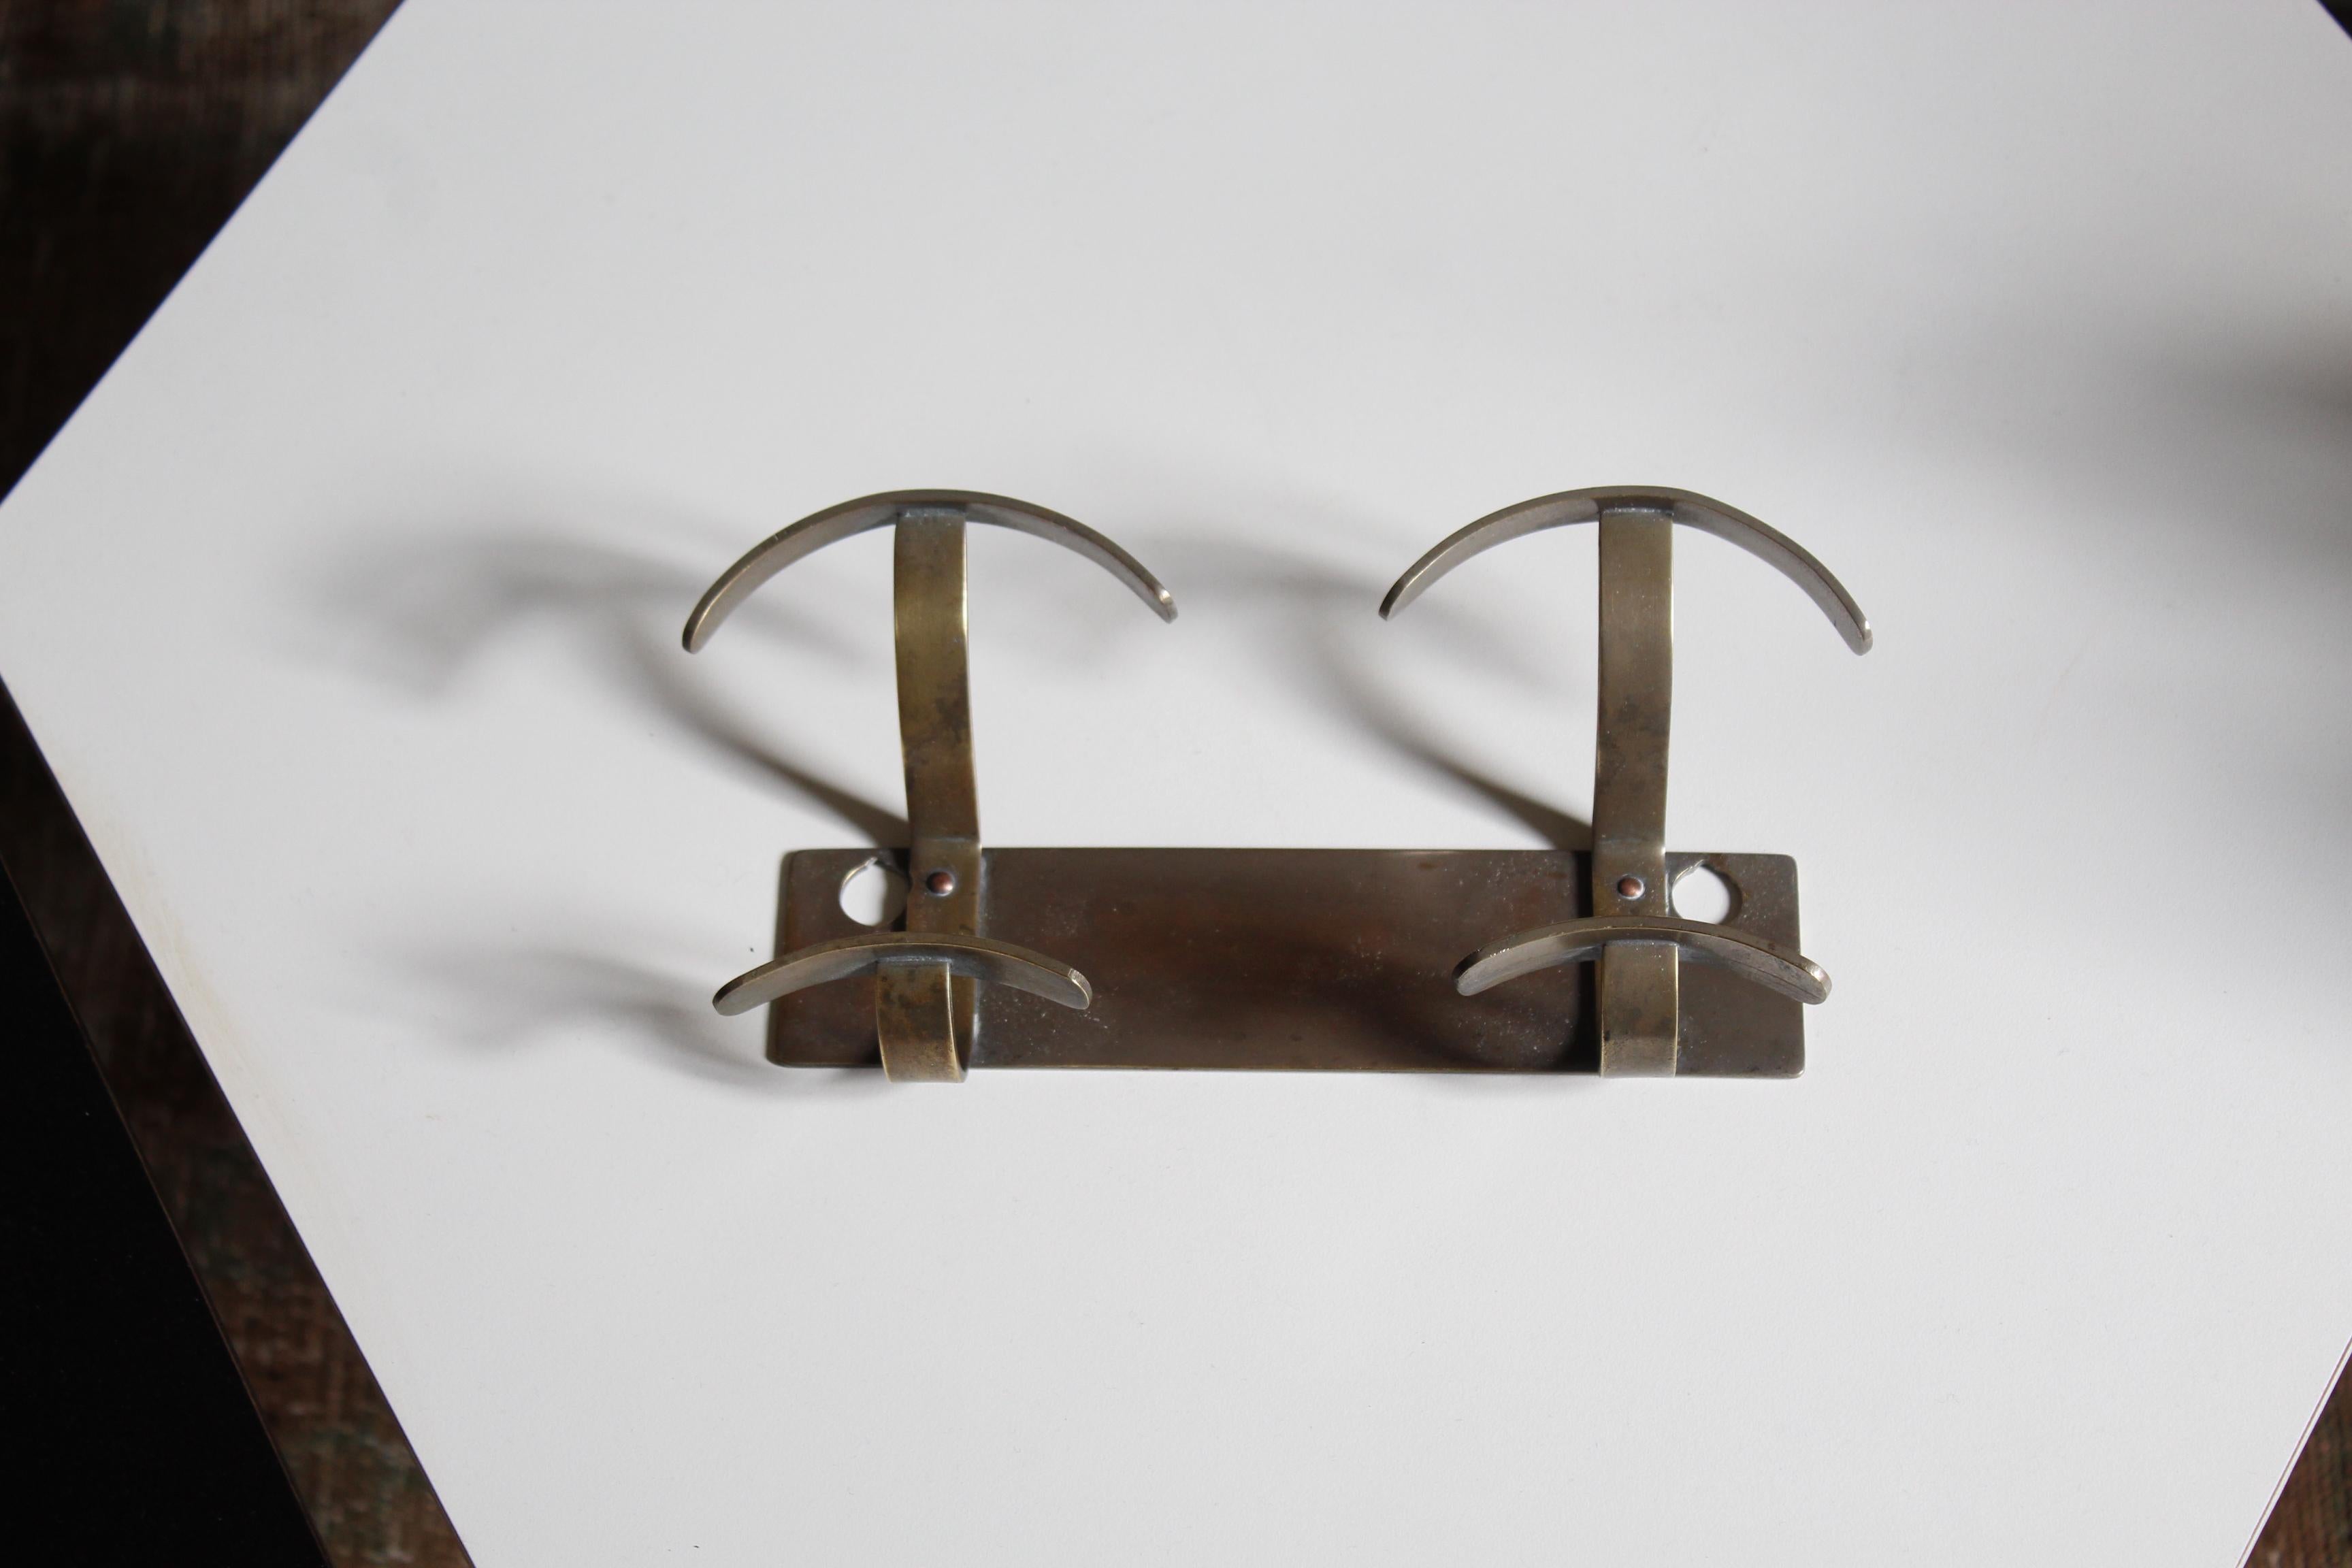 A double coat hanger / coat rack designed and produced in Italy, 1940s.